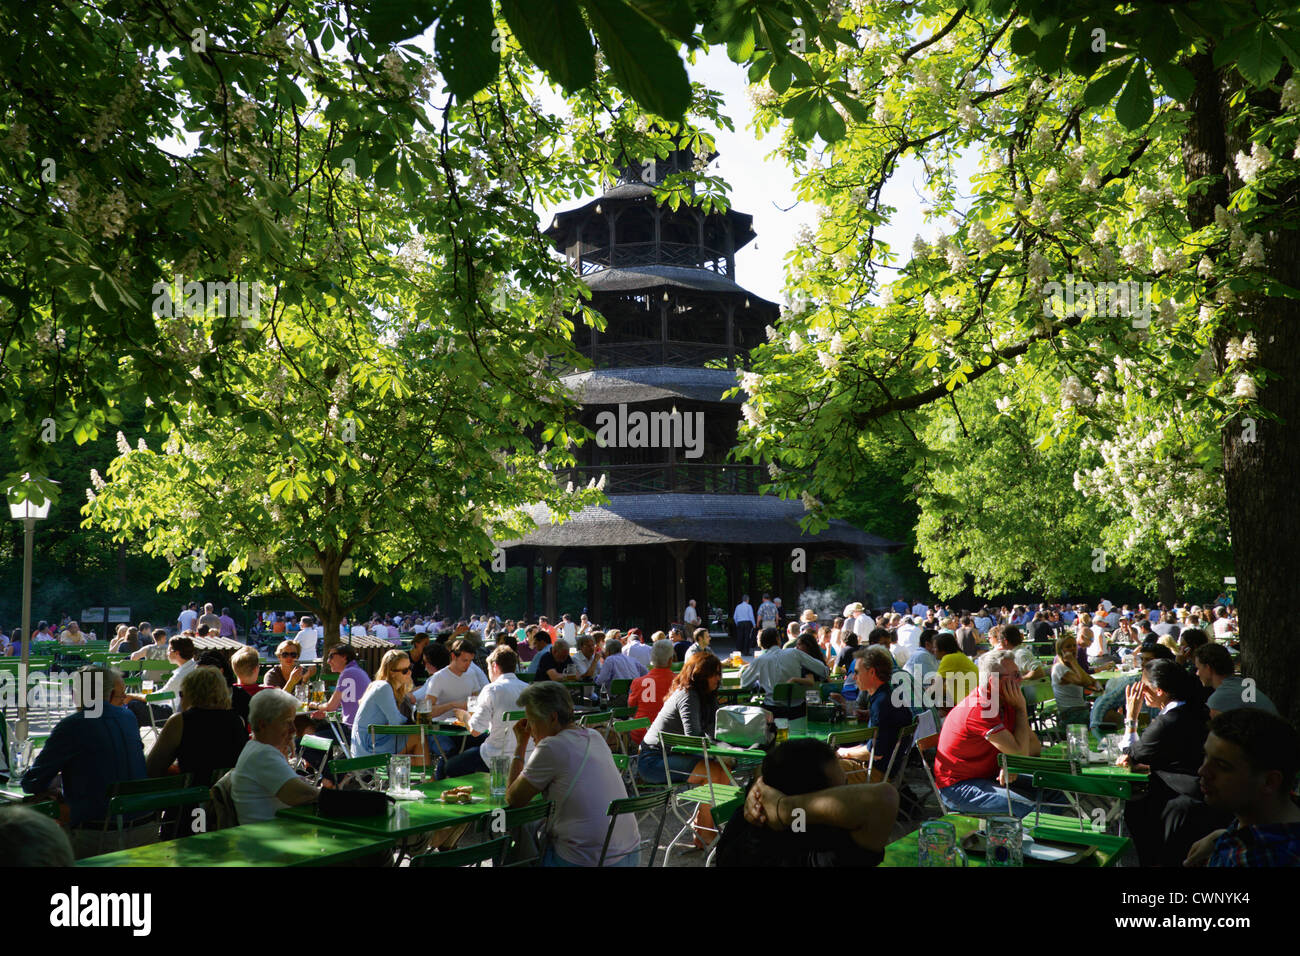 Germany, Bavaria, Munich, English Garden,  Chinese Tower, People sitting at Beer garden Stock Photo